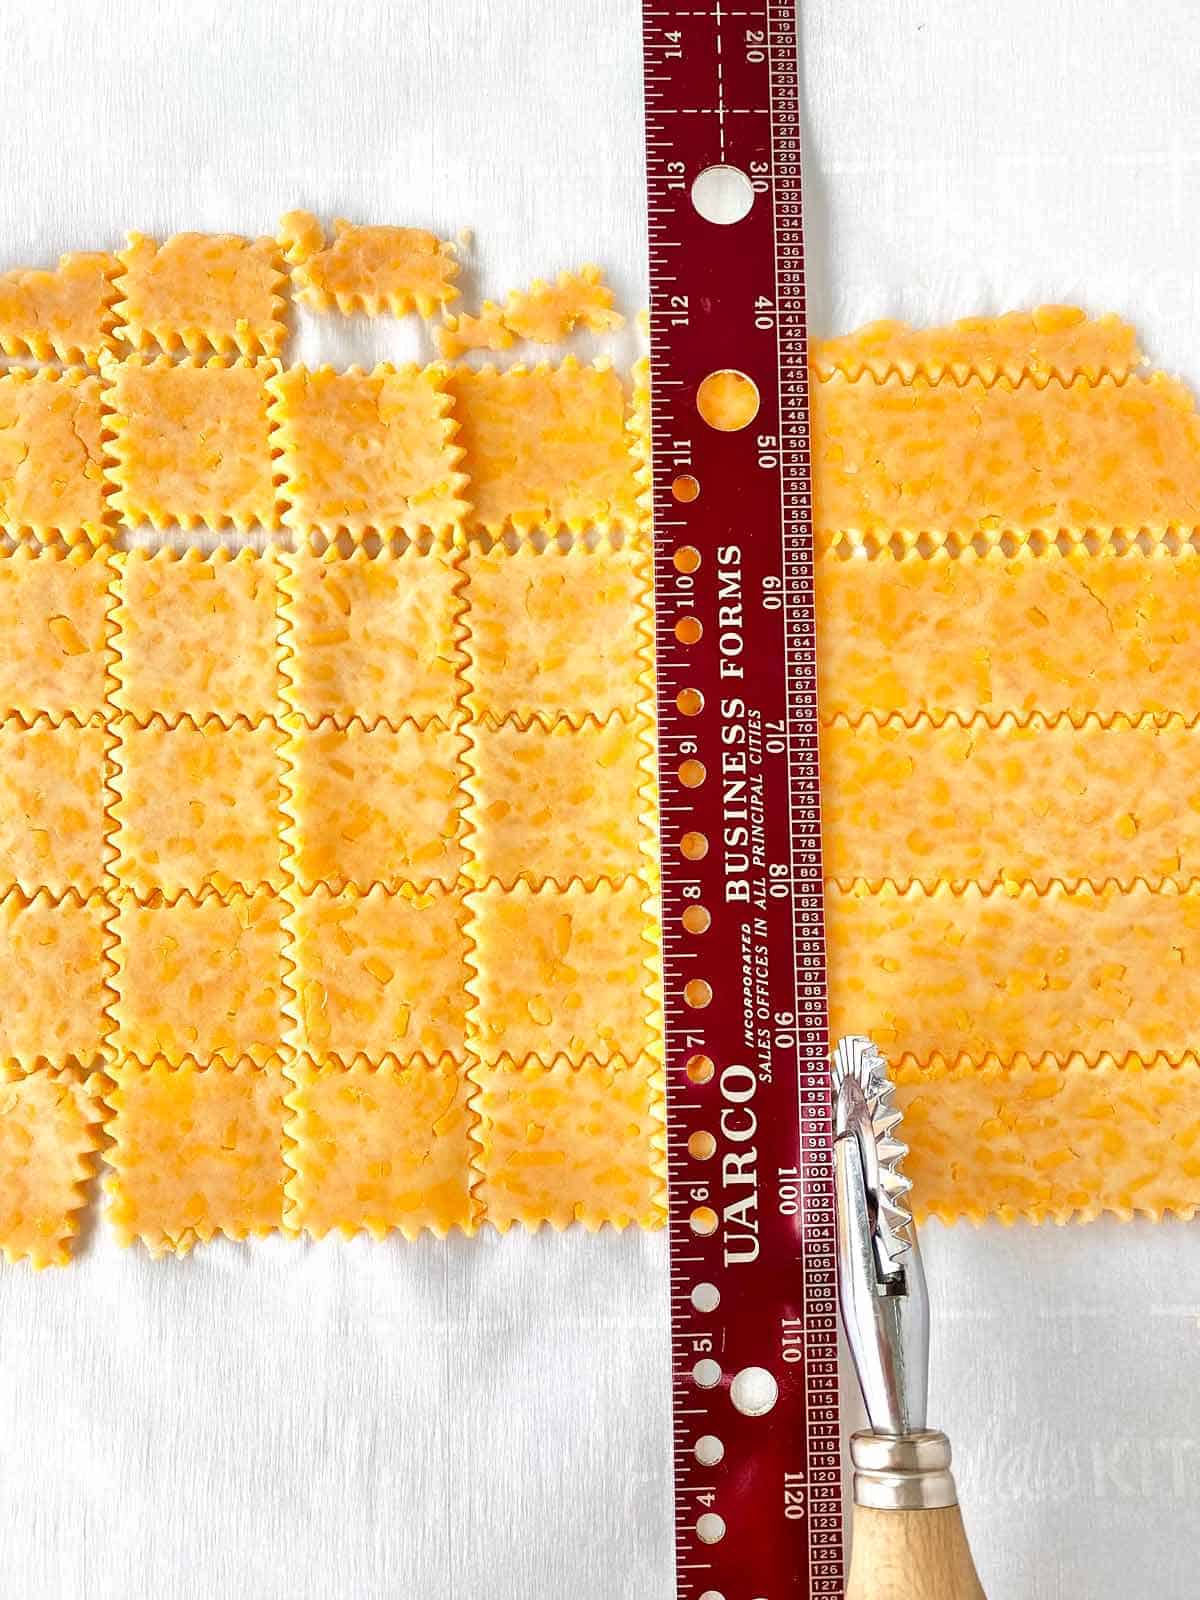 Measuring and cutting homemade crackers in squares.